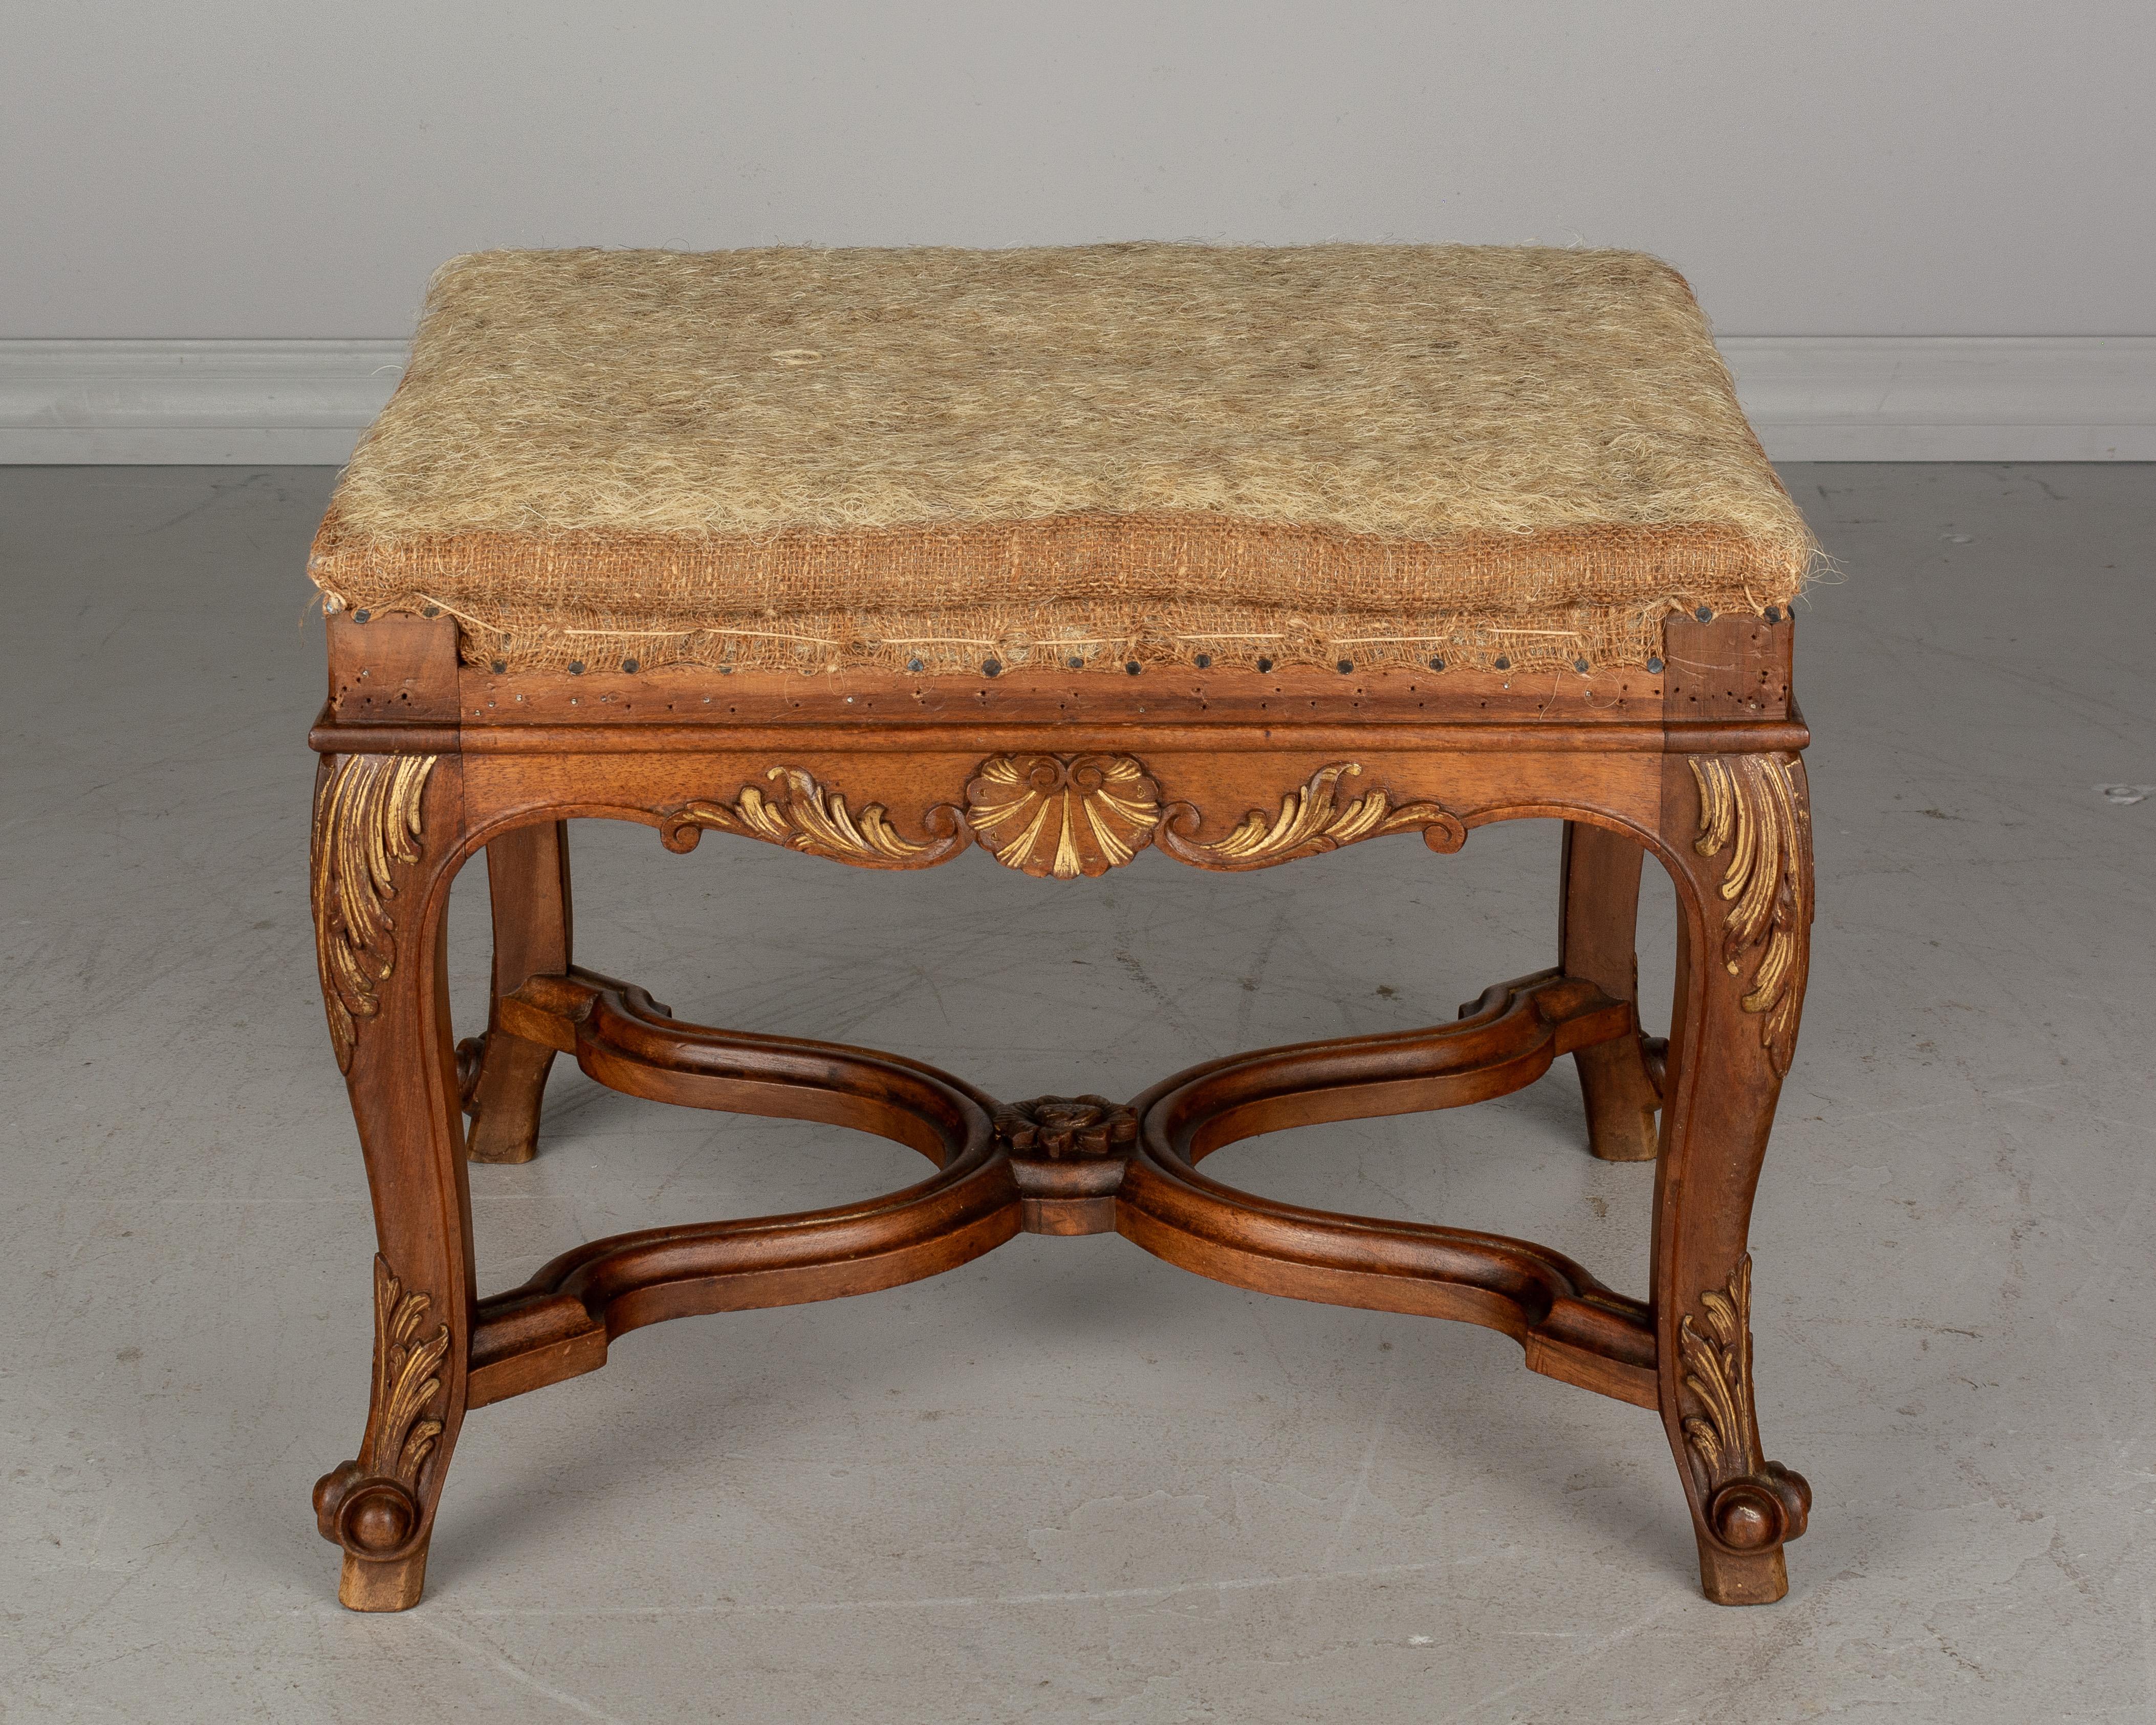 French Louis XV Style Foot Stool or Bench (Regency)